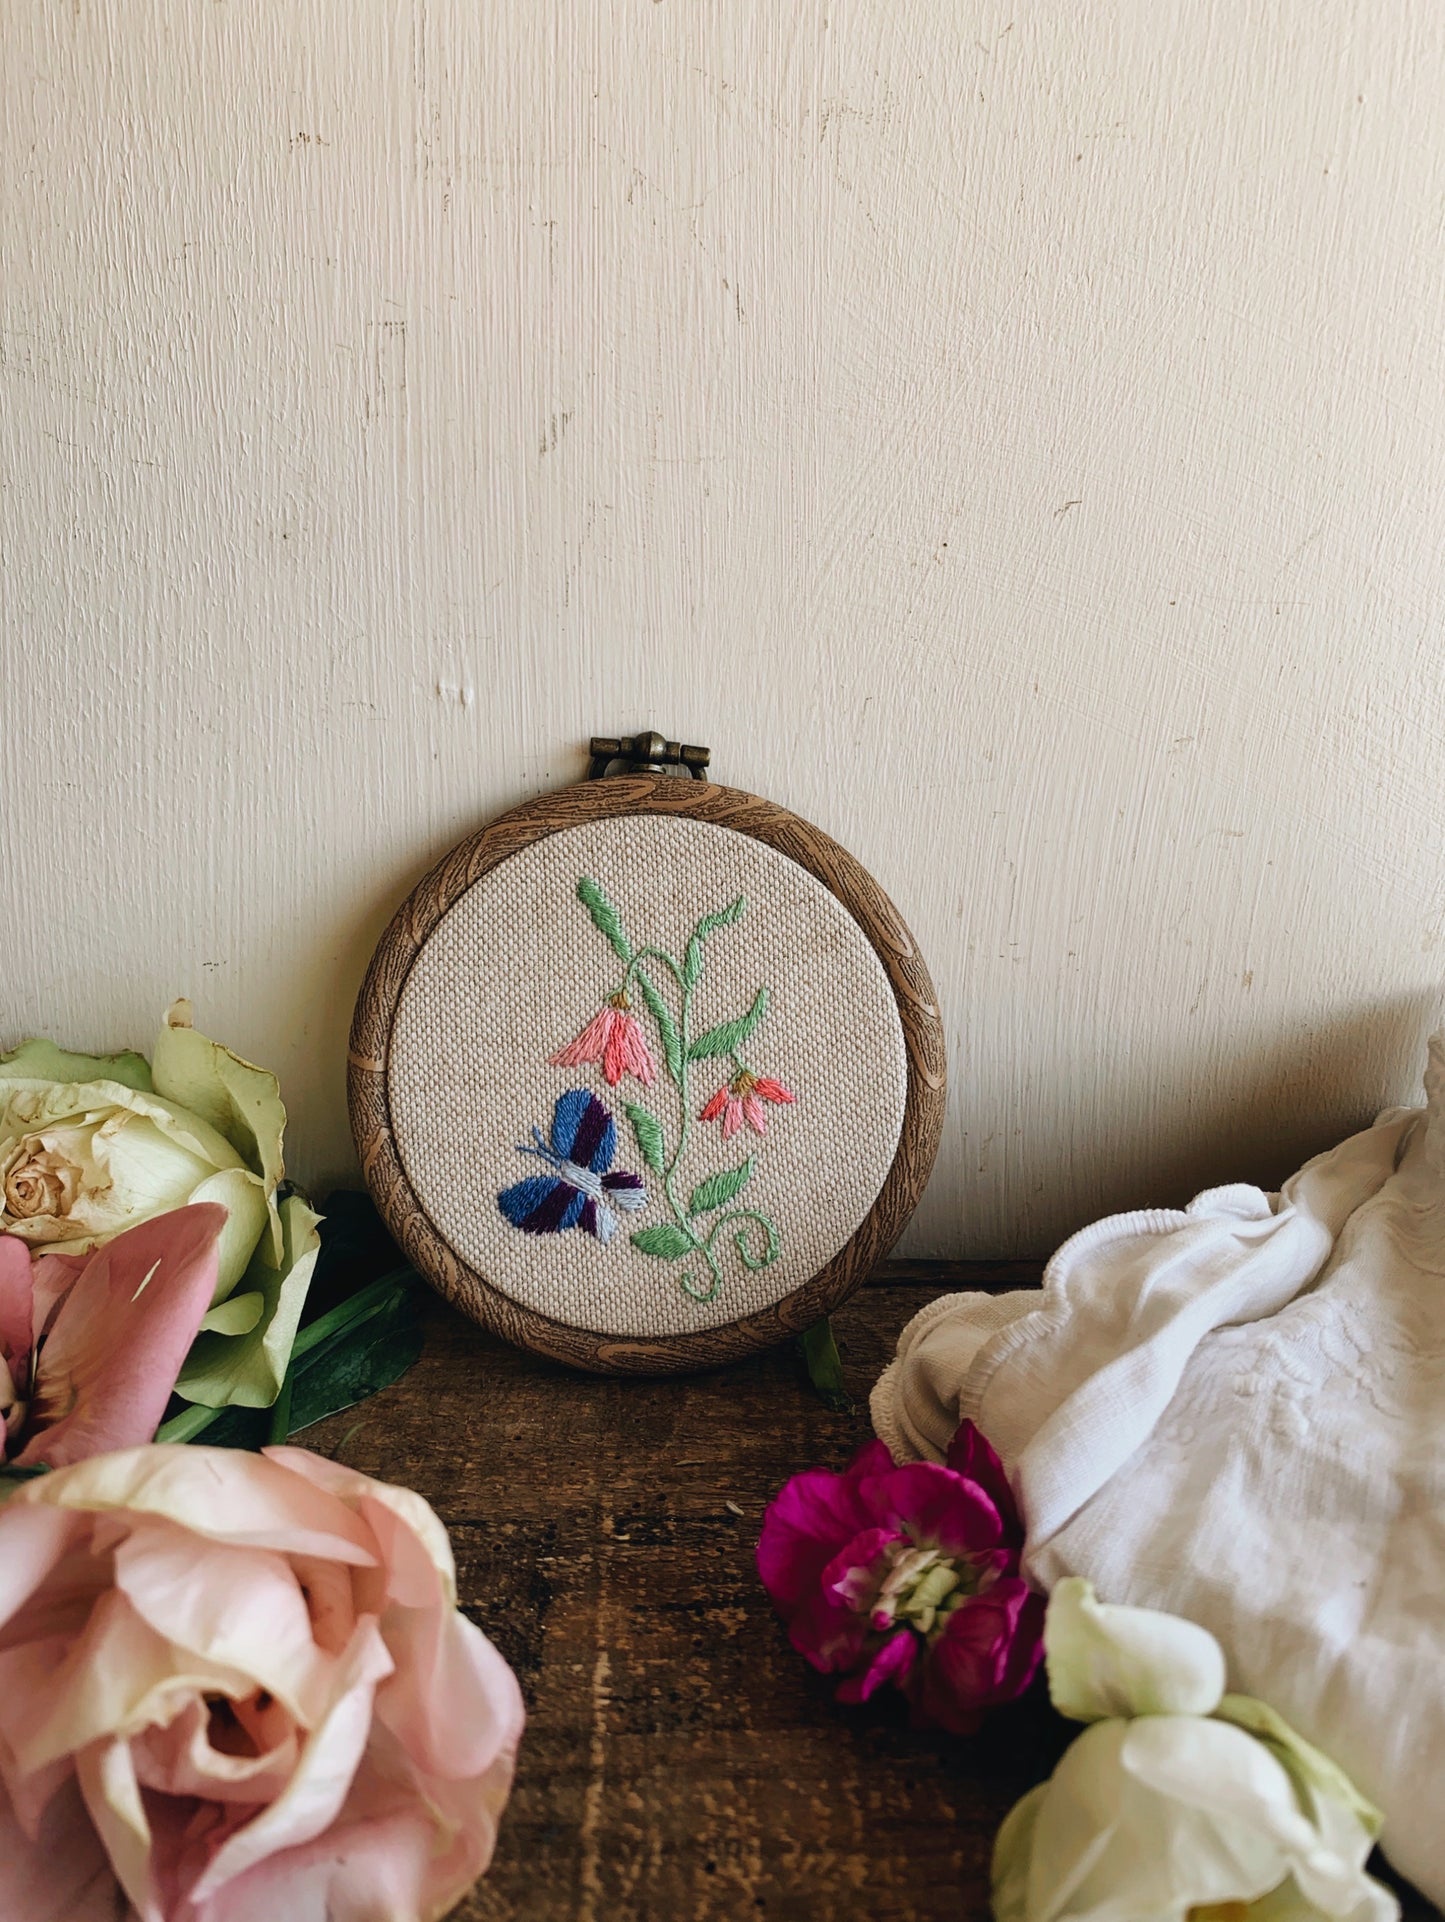 Vintage Floral and Butterfly Embroidery Hoop / Hanging